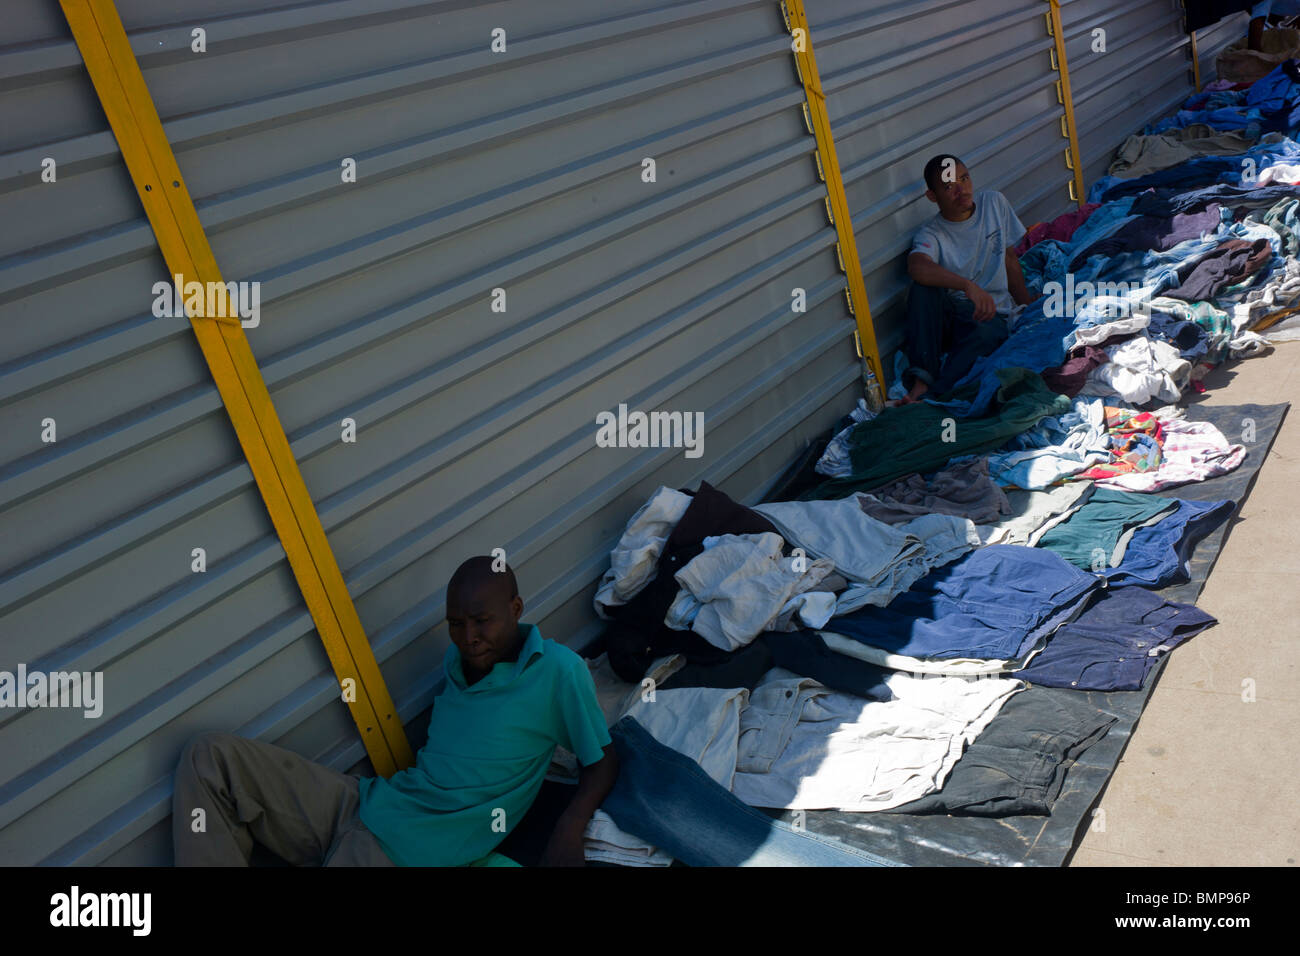 Ambulant vendors of blue jeans and tee shirts in the streets of Maputo, Mozambique. Stock Photo